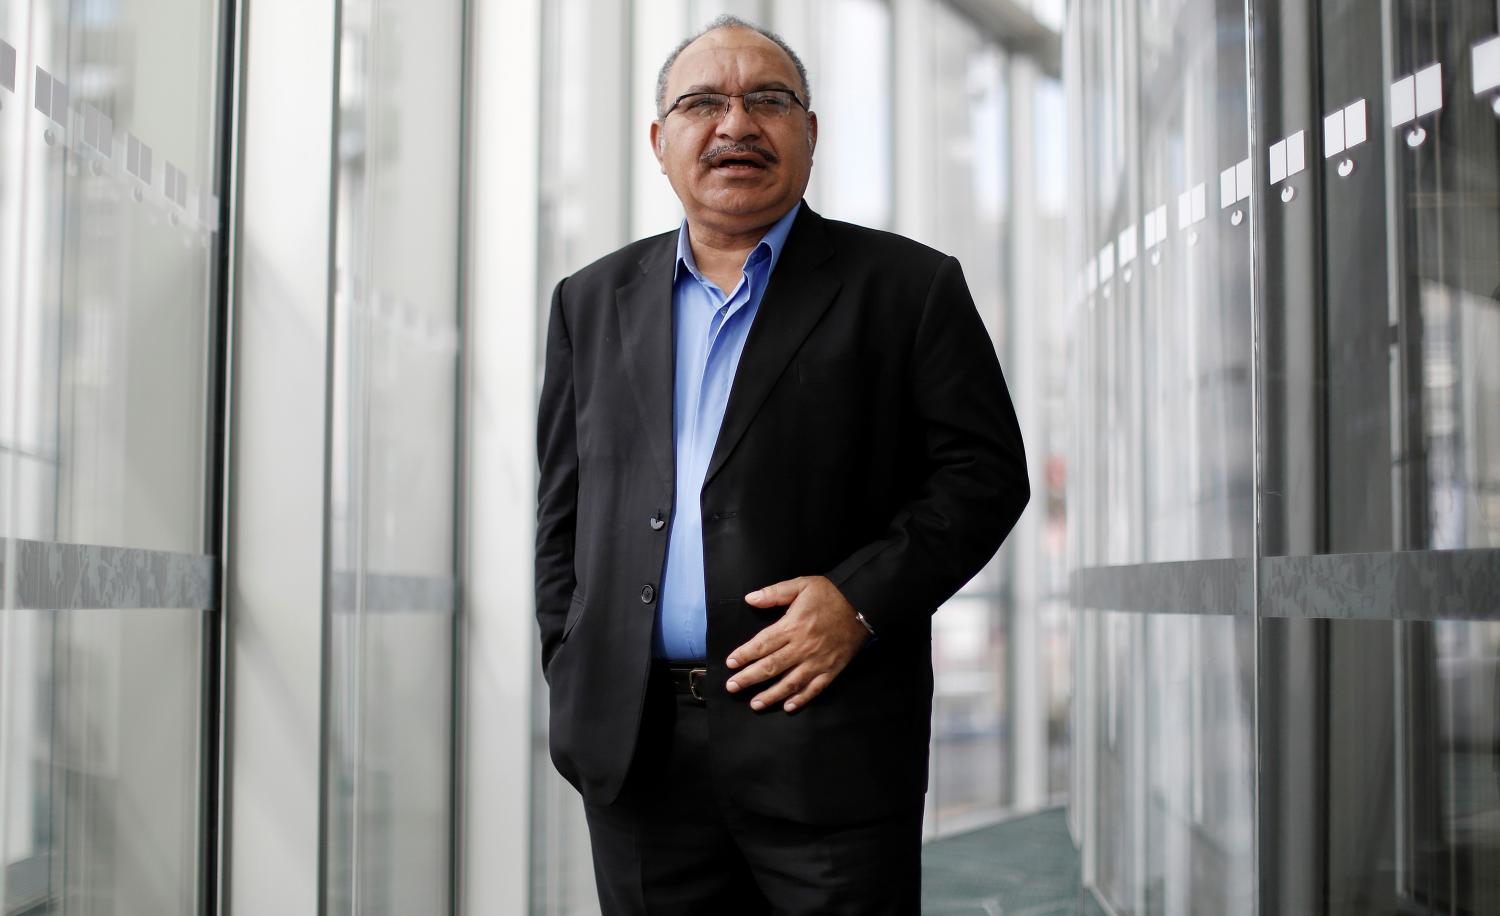 PNG's most recent PM Peter O'Neill has retained his seat in the recent election and his party is forecast to be called on to form government. (Photo: David Moir/ via Getty Images)